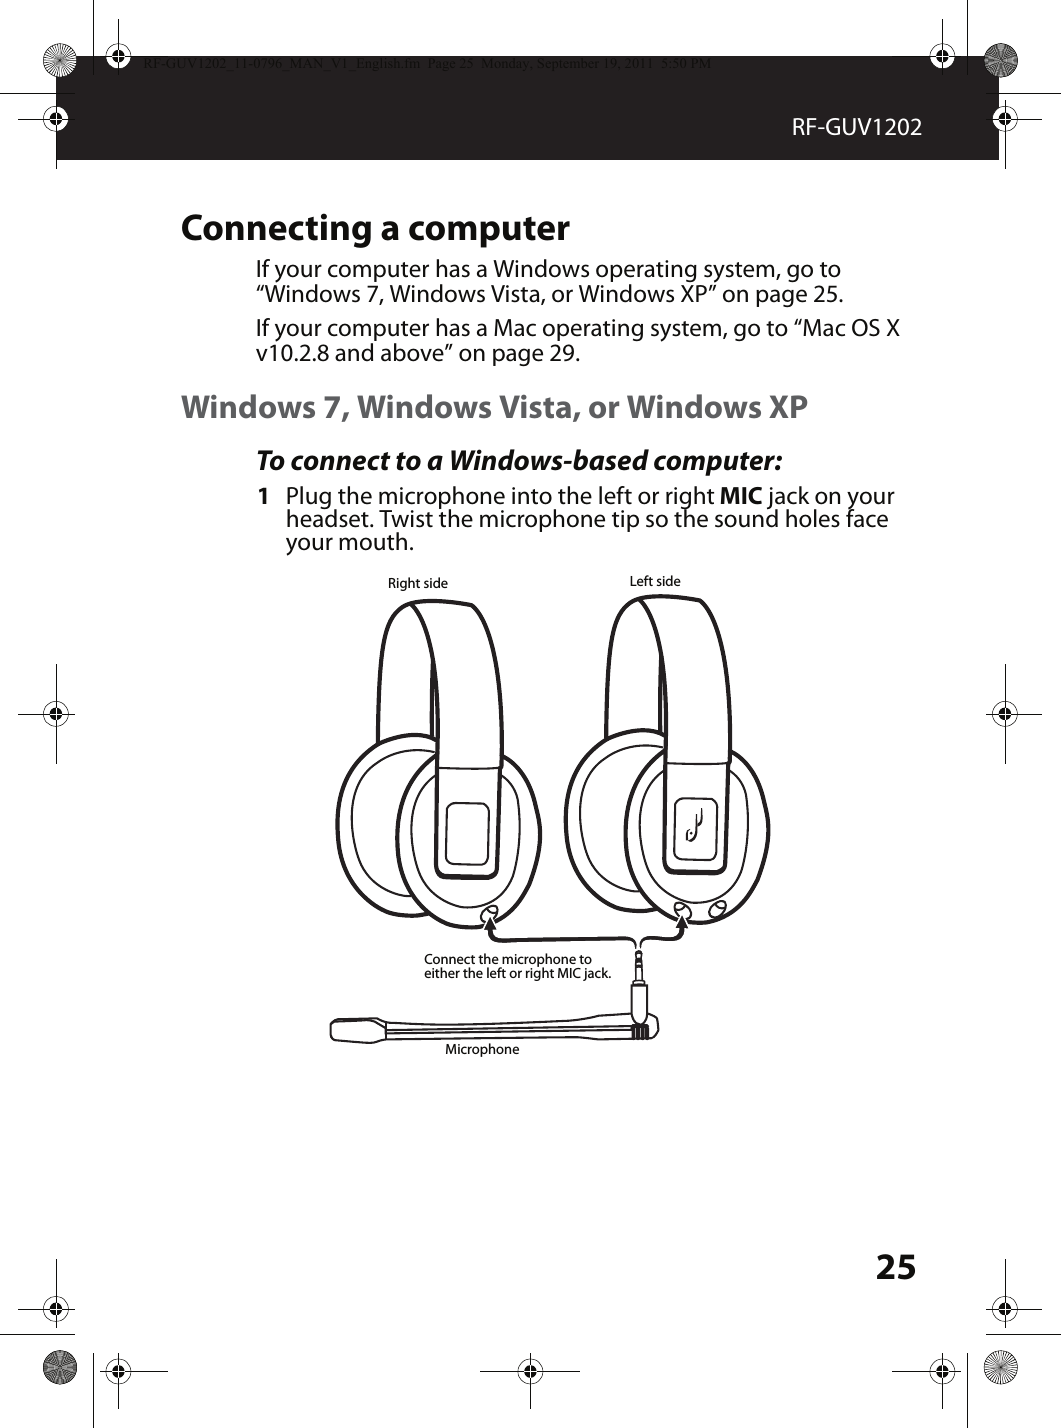 25RF-GUV1202Connecting a computerIf your computer has a Windows operating system, go to “Windows 7, Windows Vista, or Windows XP” on page 25.If your computer has a Mac operating system, go to “Mac OS X v10.2.8 and above” on page 29.Windows 7, Windows Vista, or Windows XPTo connect to a Windows-based computer:1Plug the microphone into the left or right MIC jack on your headset. Twist the microphone tip so the sound holes face your mouth.MicrophoneLeft sideRight sideConnect the microphone to either the left or right MIC jack.RF-GUV1202_11-0796_MAN_V1_English.fm  Page 25  Monday, September 19, 2011  5:50 PM